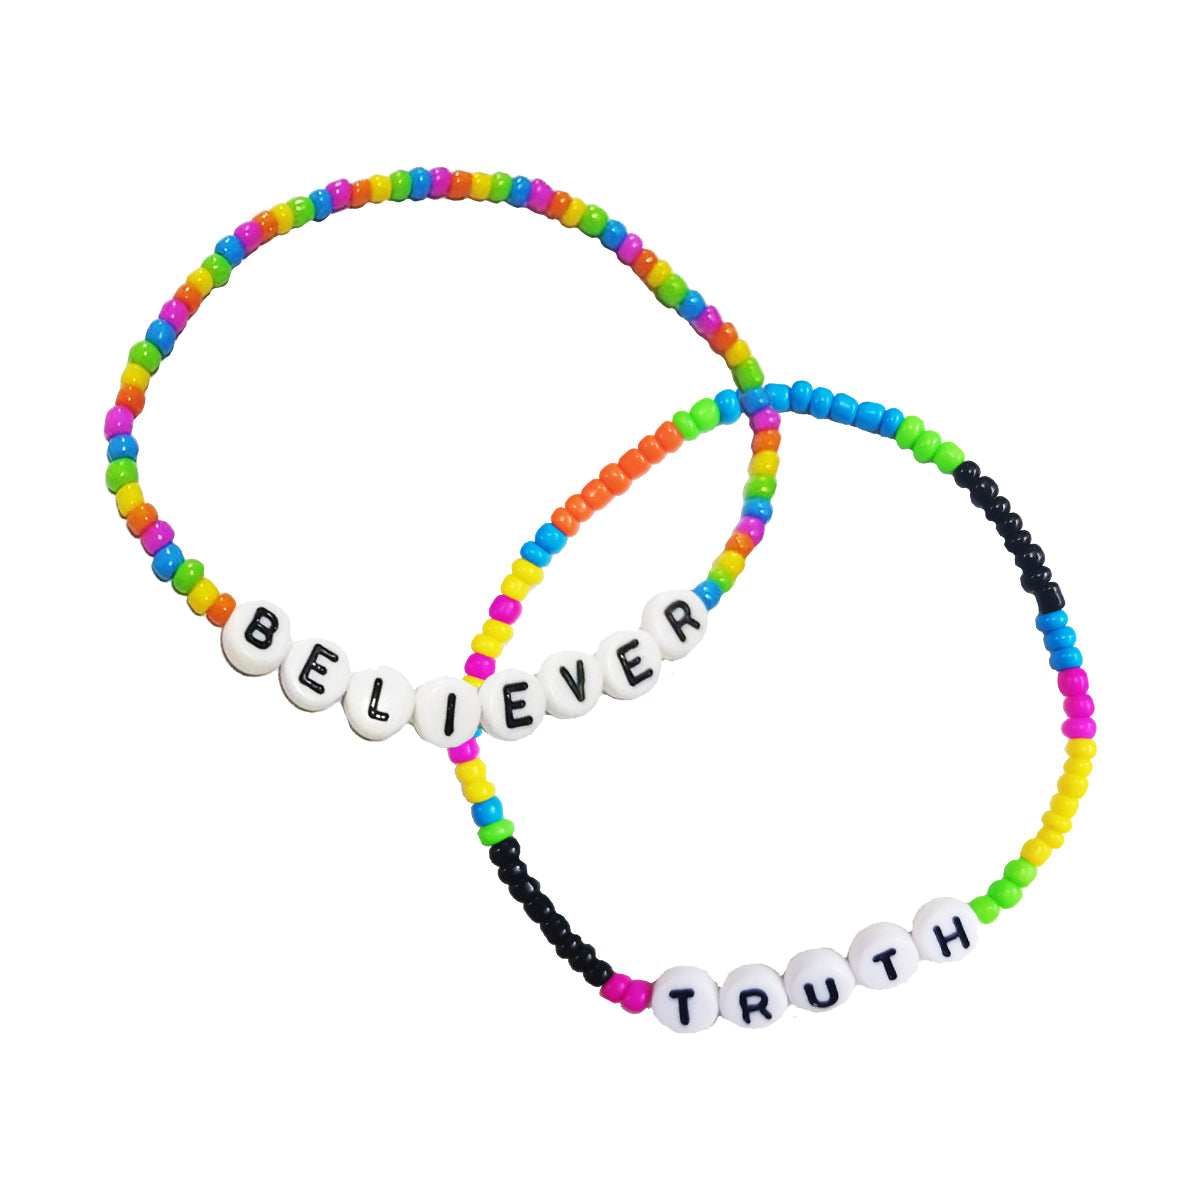 Two Rainbow beaded bracelets with letter beads saying 'Believer' and 'Truth'